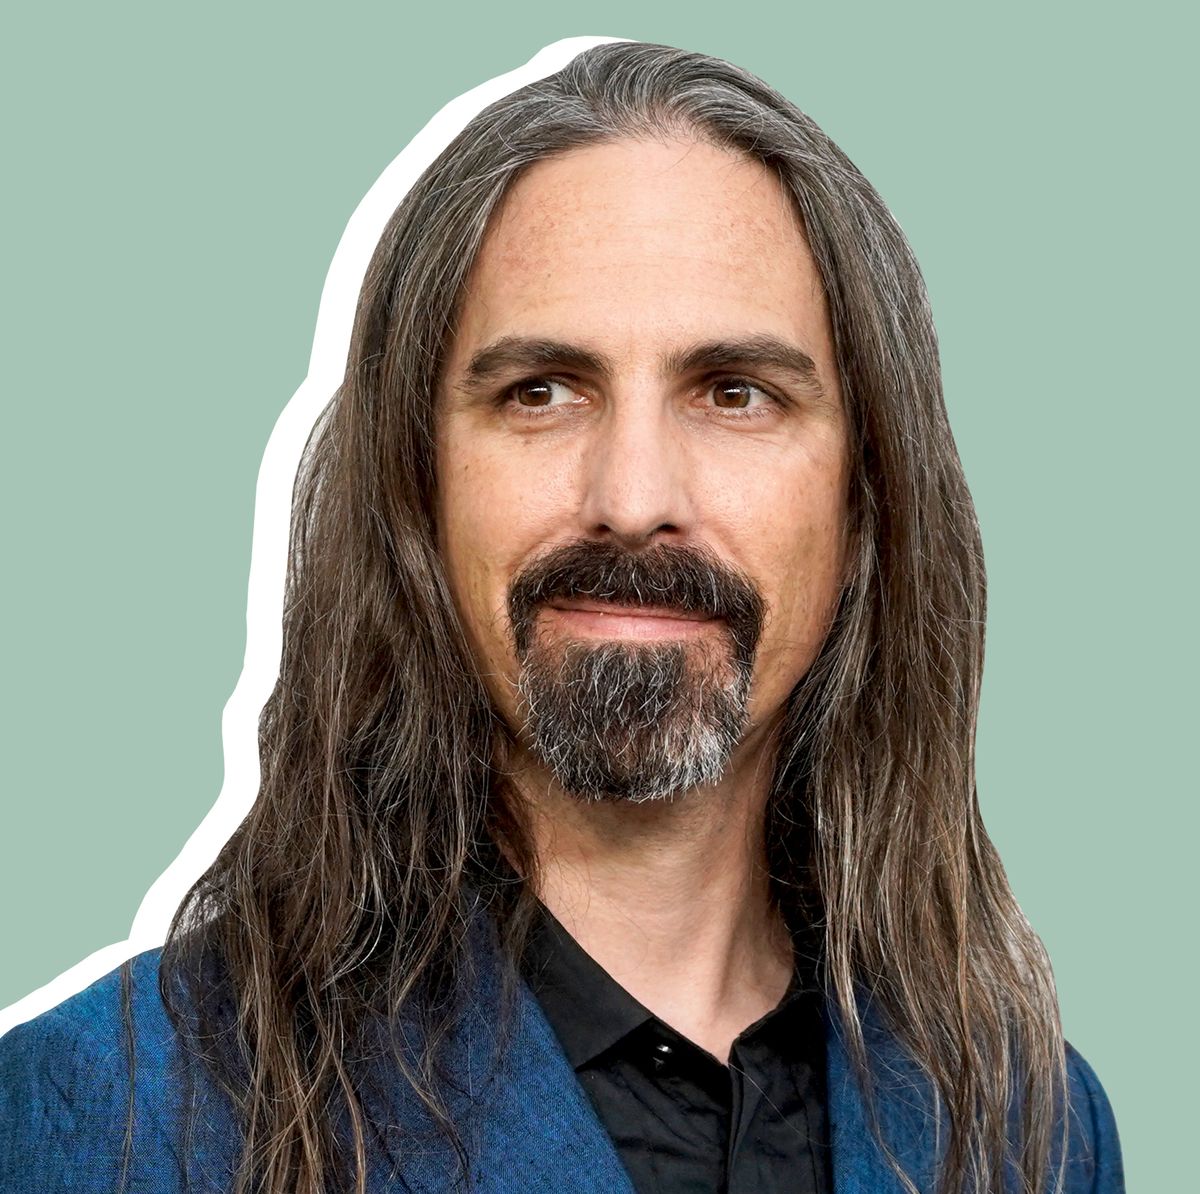 The Lord Of The Rings: The Rings Of Power's Bear McCreary On The